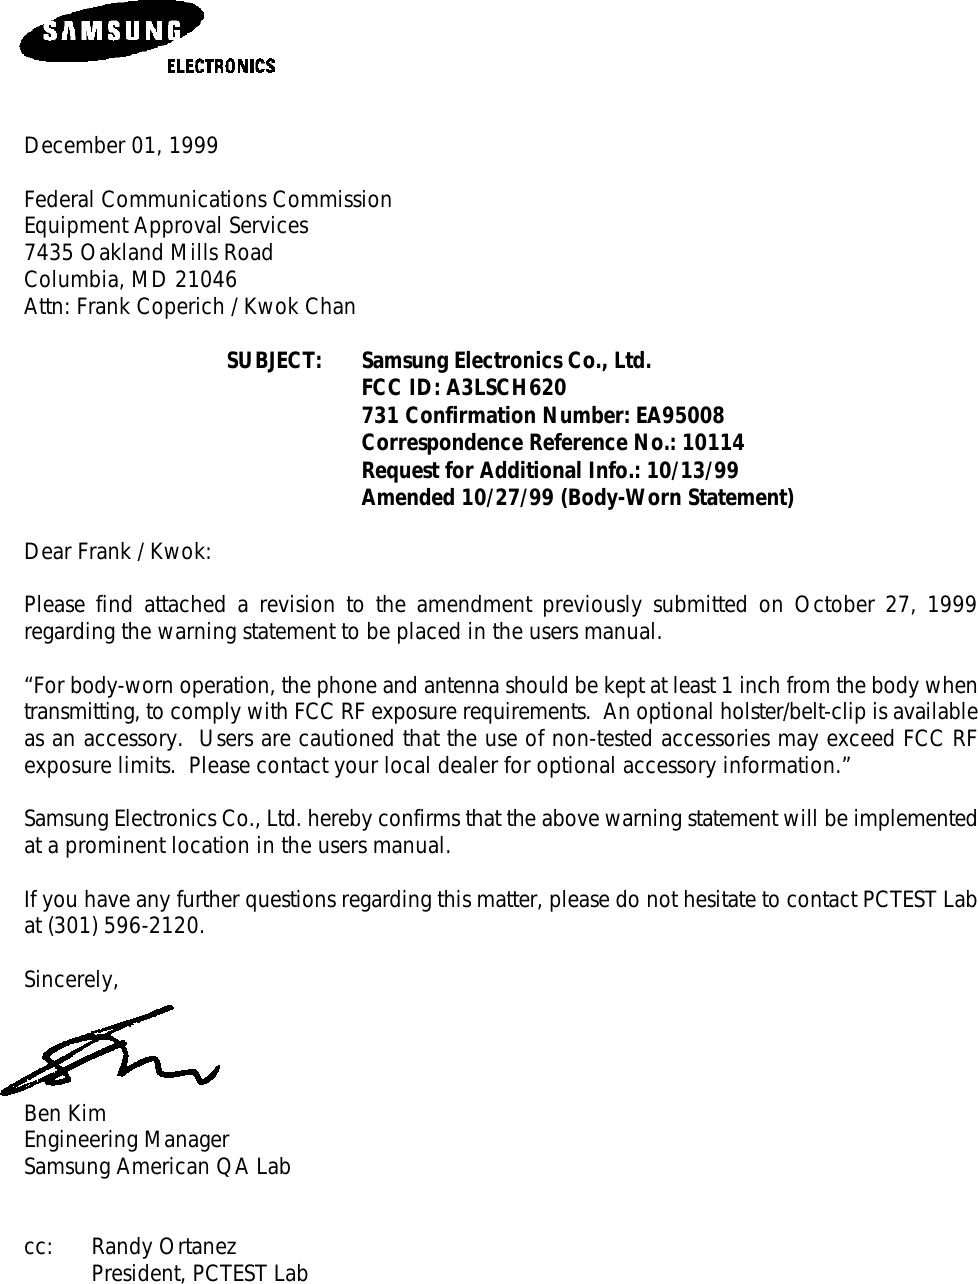 December 01, 1999Federal Communications CommissionEquipment Approval Services7435 Oakland Mills RoadColumbia, MD 21046Attn: Frank Coperich / Kwok ChanSUBJECT: Samsung Electronics Co., Ltd.FCC ID: A3LSCH620731 Confirmation Number: EA95008Correspondence Reference No.: 10114 Request for Additional Info.: 10/13/99Amended 10/27/99 (Body-Worn Statement)Dear Frank / Kwok:Please find attached a revision to the amendment previously submitted on October 27, 1999regarding the warning statement to be placed in the users manual.“For body-worn operation, the phone and antenna should be kept at least 1 inch from the body whentransmitting, to comply with FCC RF exposure requirements.  An optional holster/belt-clip is availableas an accessory.  Users are cautioned that the use of non-tested accessories may exceed FCC RFexposure limits.  Please contact your local dealer for optional accessory information.”Samsung Electronics Co., Ltd. hereby confirms that the above warning statement will be implementedat a prominent location in the users manual.If you have any further questions regarding this matter, please do not hesitate to contact PCTEST Labat (301) 596-2120.Sincerely,Ben KimEngineering ManagerSamsung American QA Labcc: Randy OrtanezPresident, PCTEST Lab